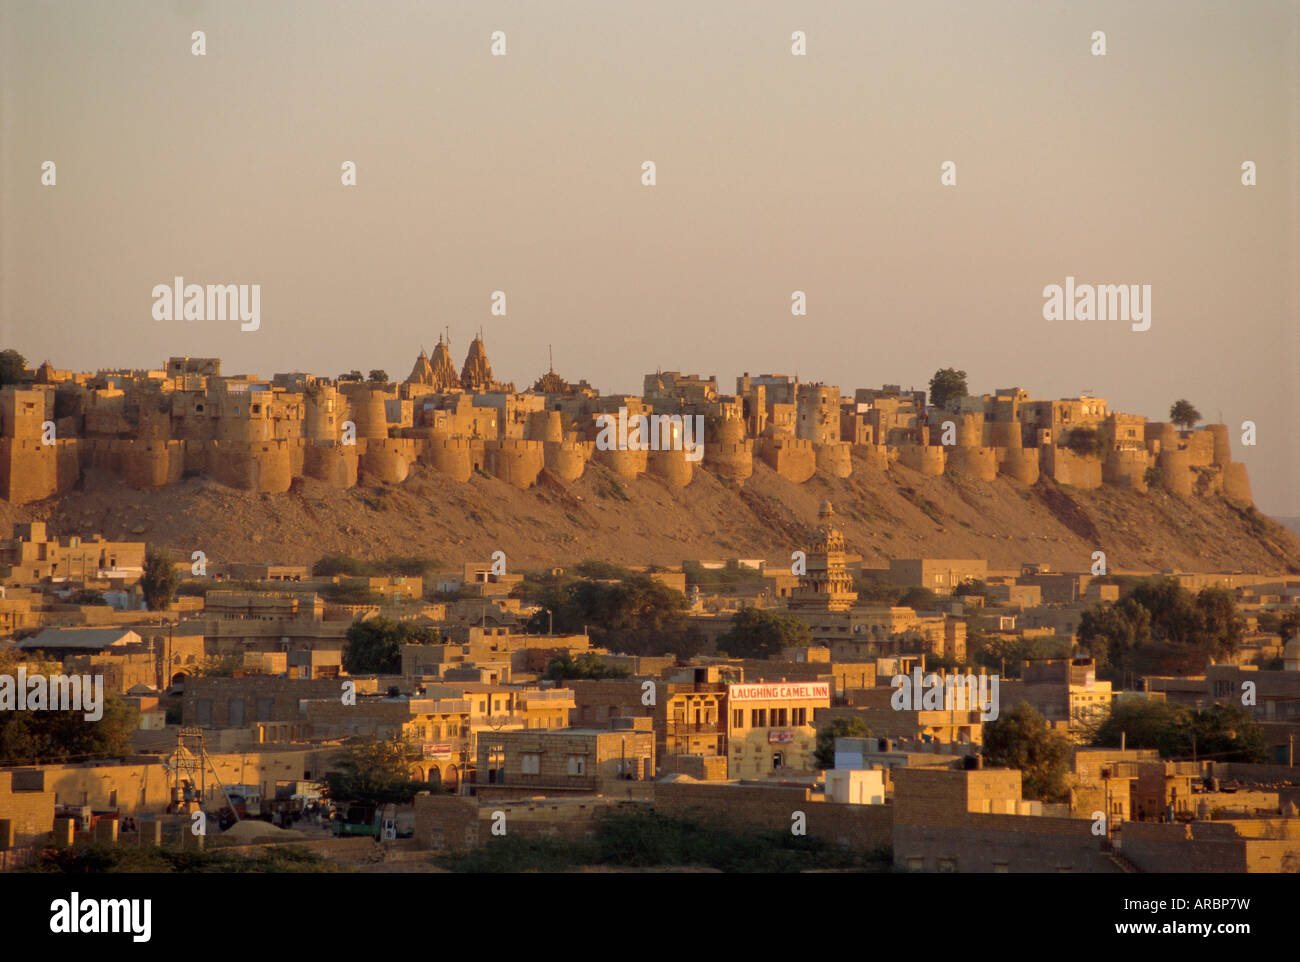 Jaisalmer, view of the fortified old city, Rajasthan, India Stock Photo